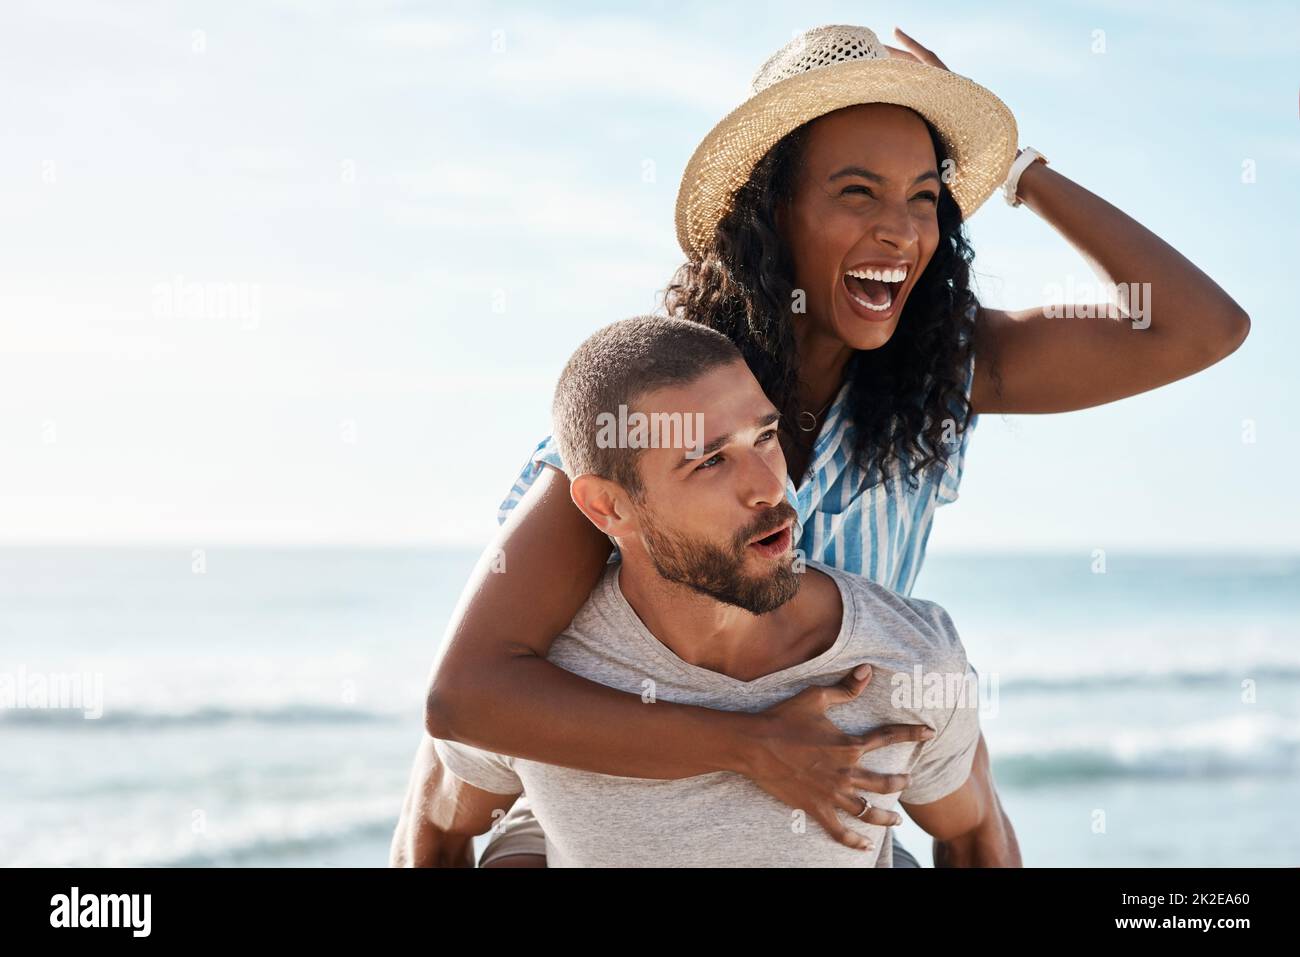 Checking out the sights around the sea. Shot of a young man piggybacking his girlfriend at the beach. Stock Photo